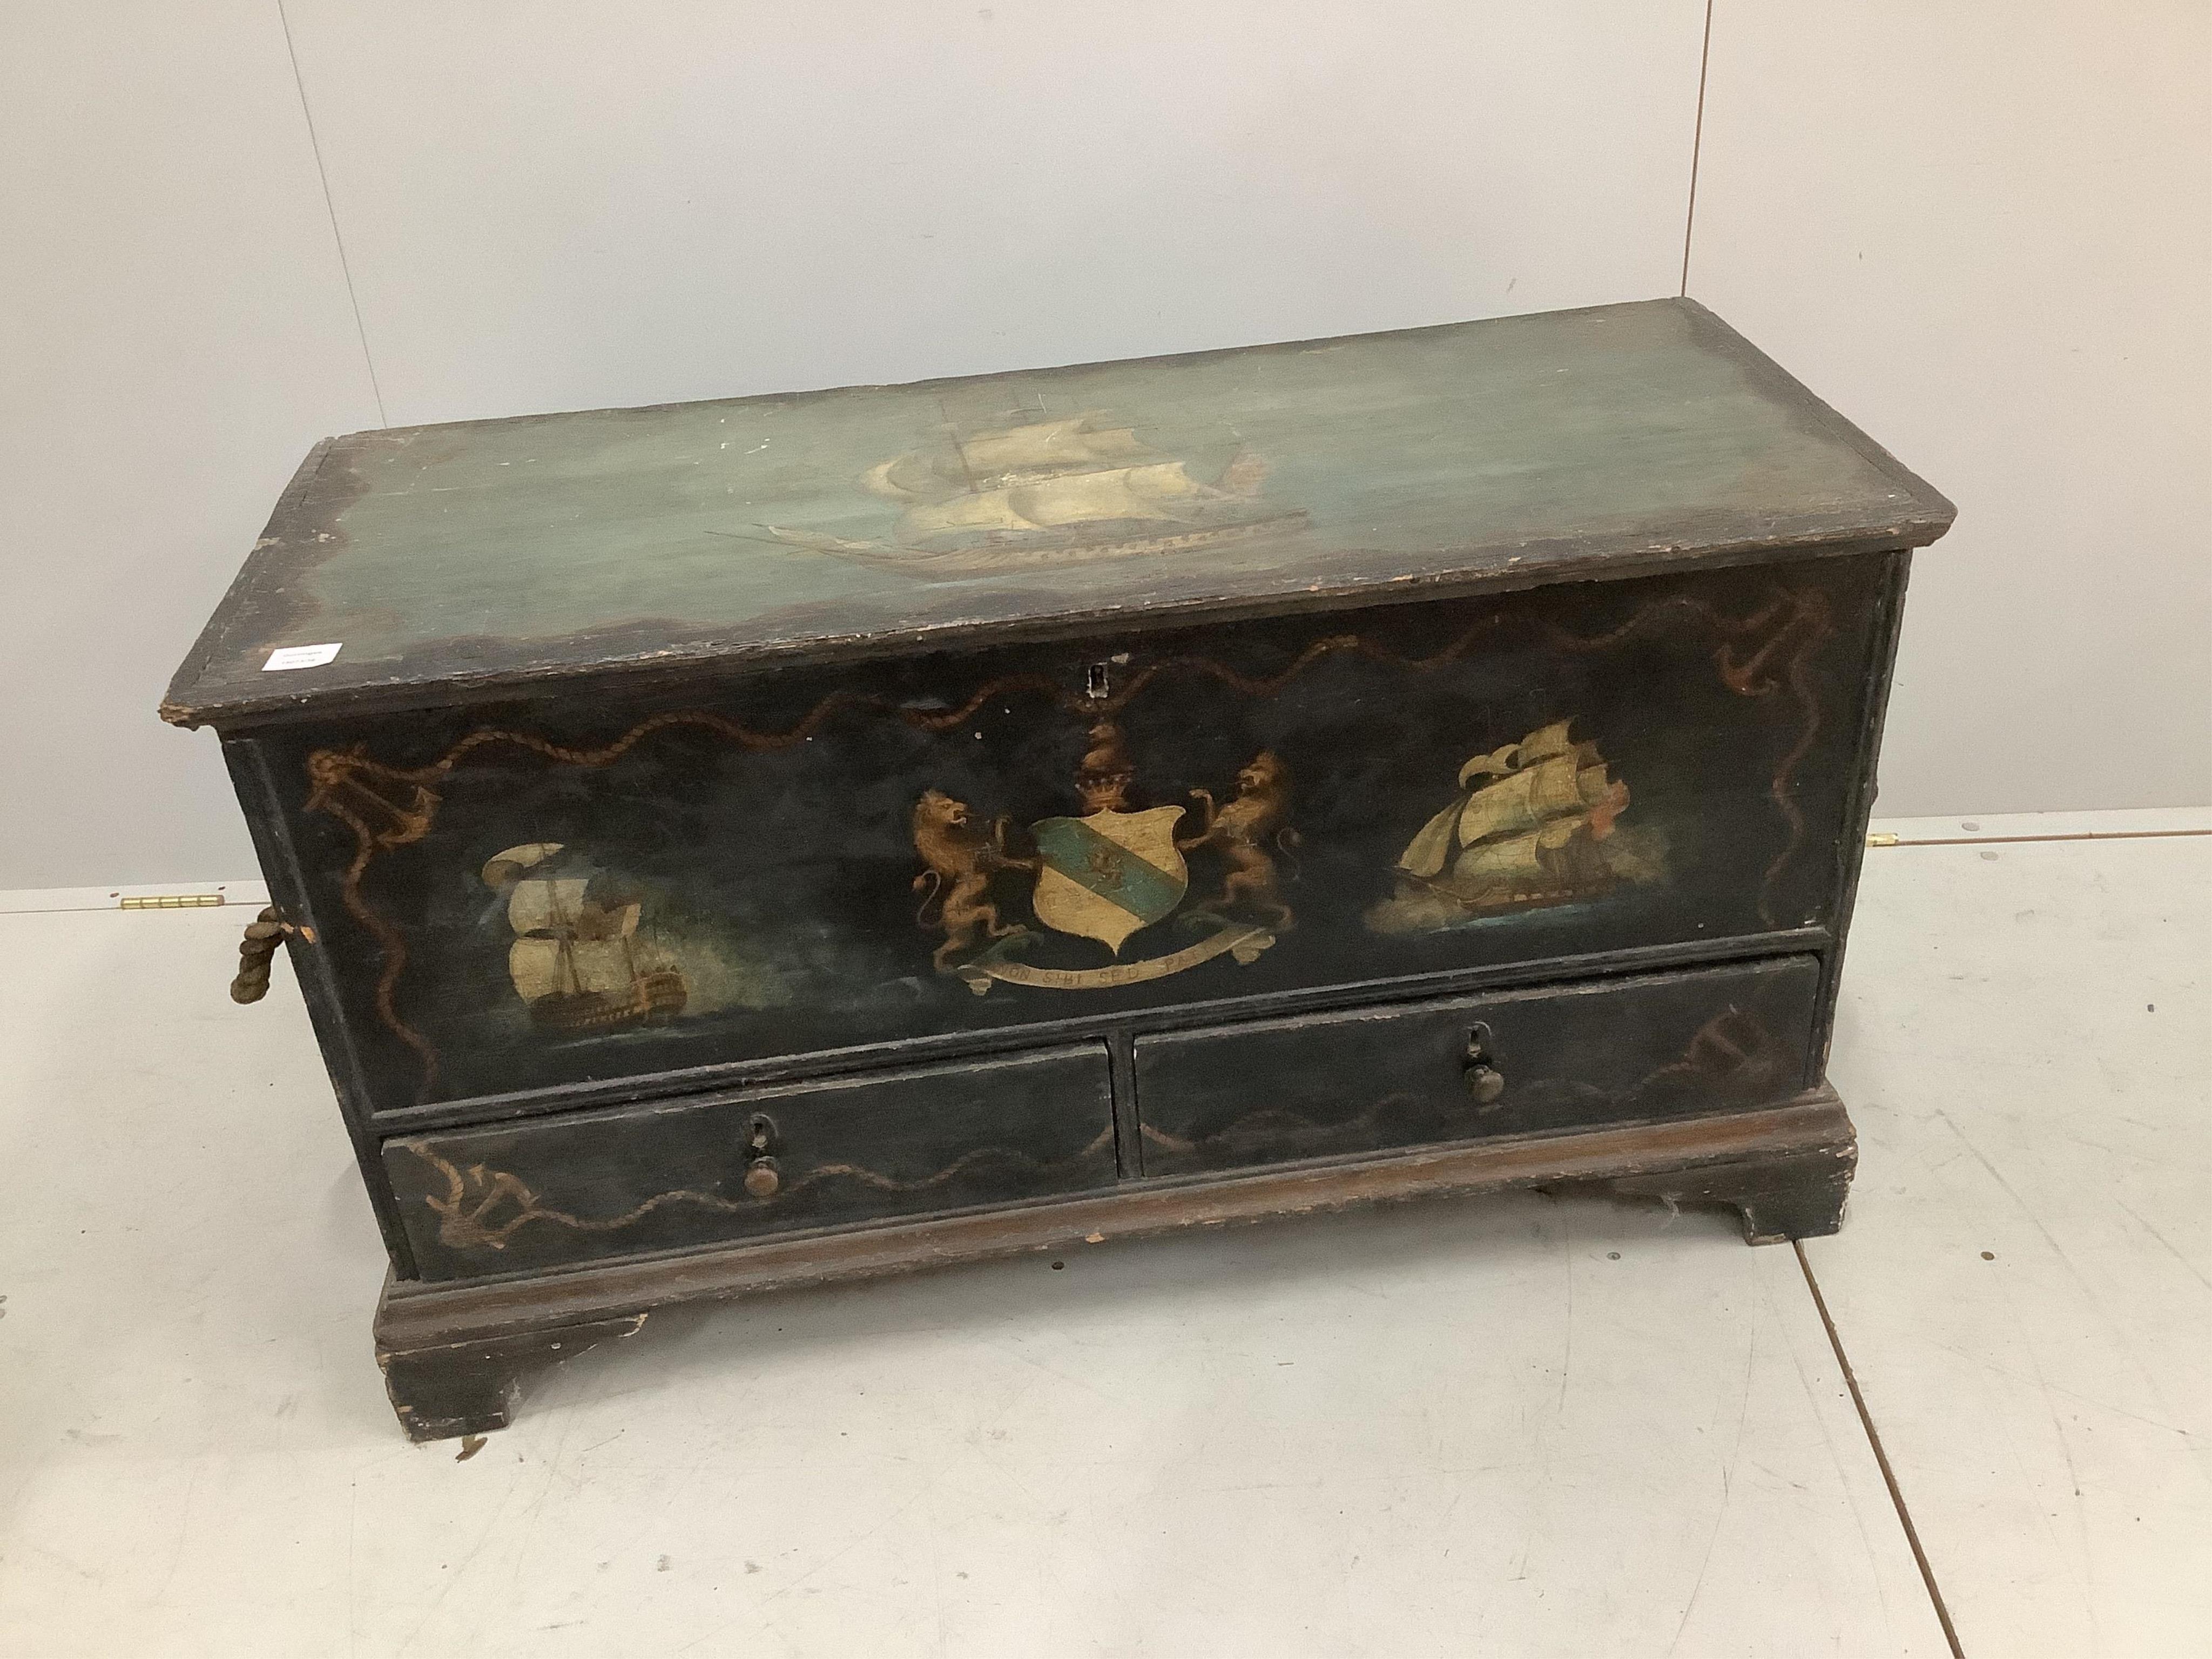 A 19th century painted pine mule chest decorated with a central armorial and English warships, width 110cm, depth 46cm, height 62cm. Condition - fair